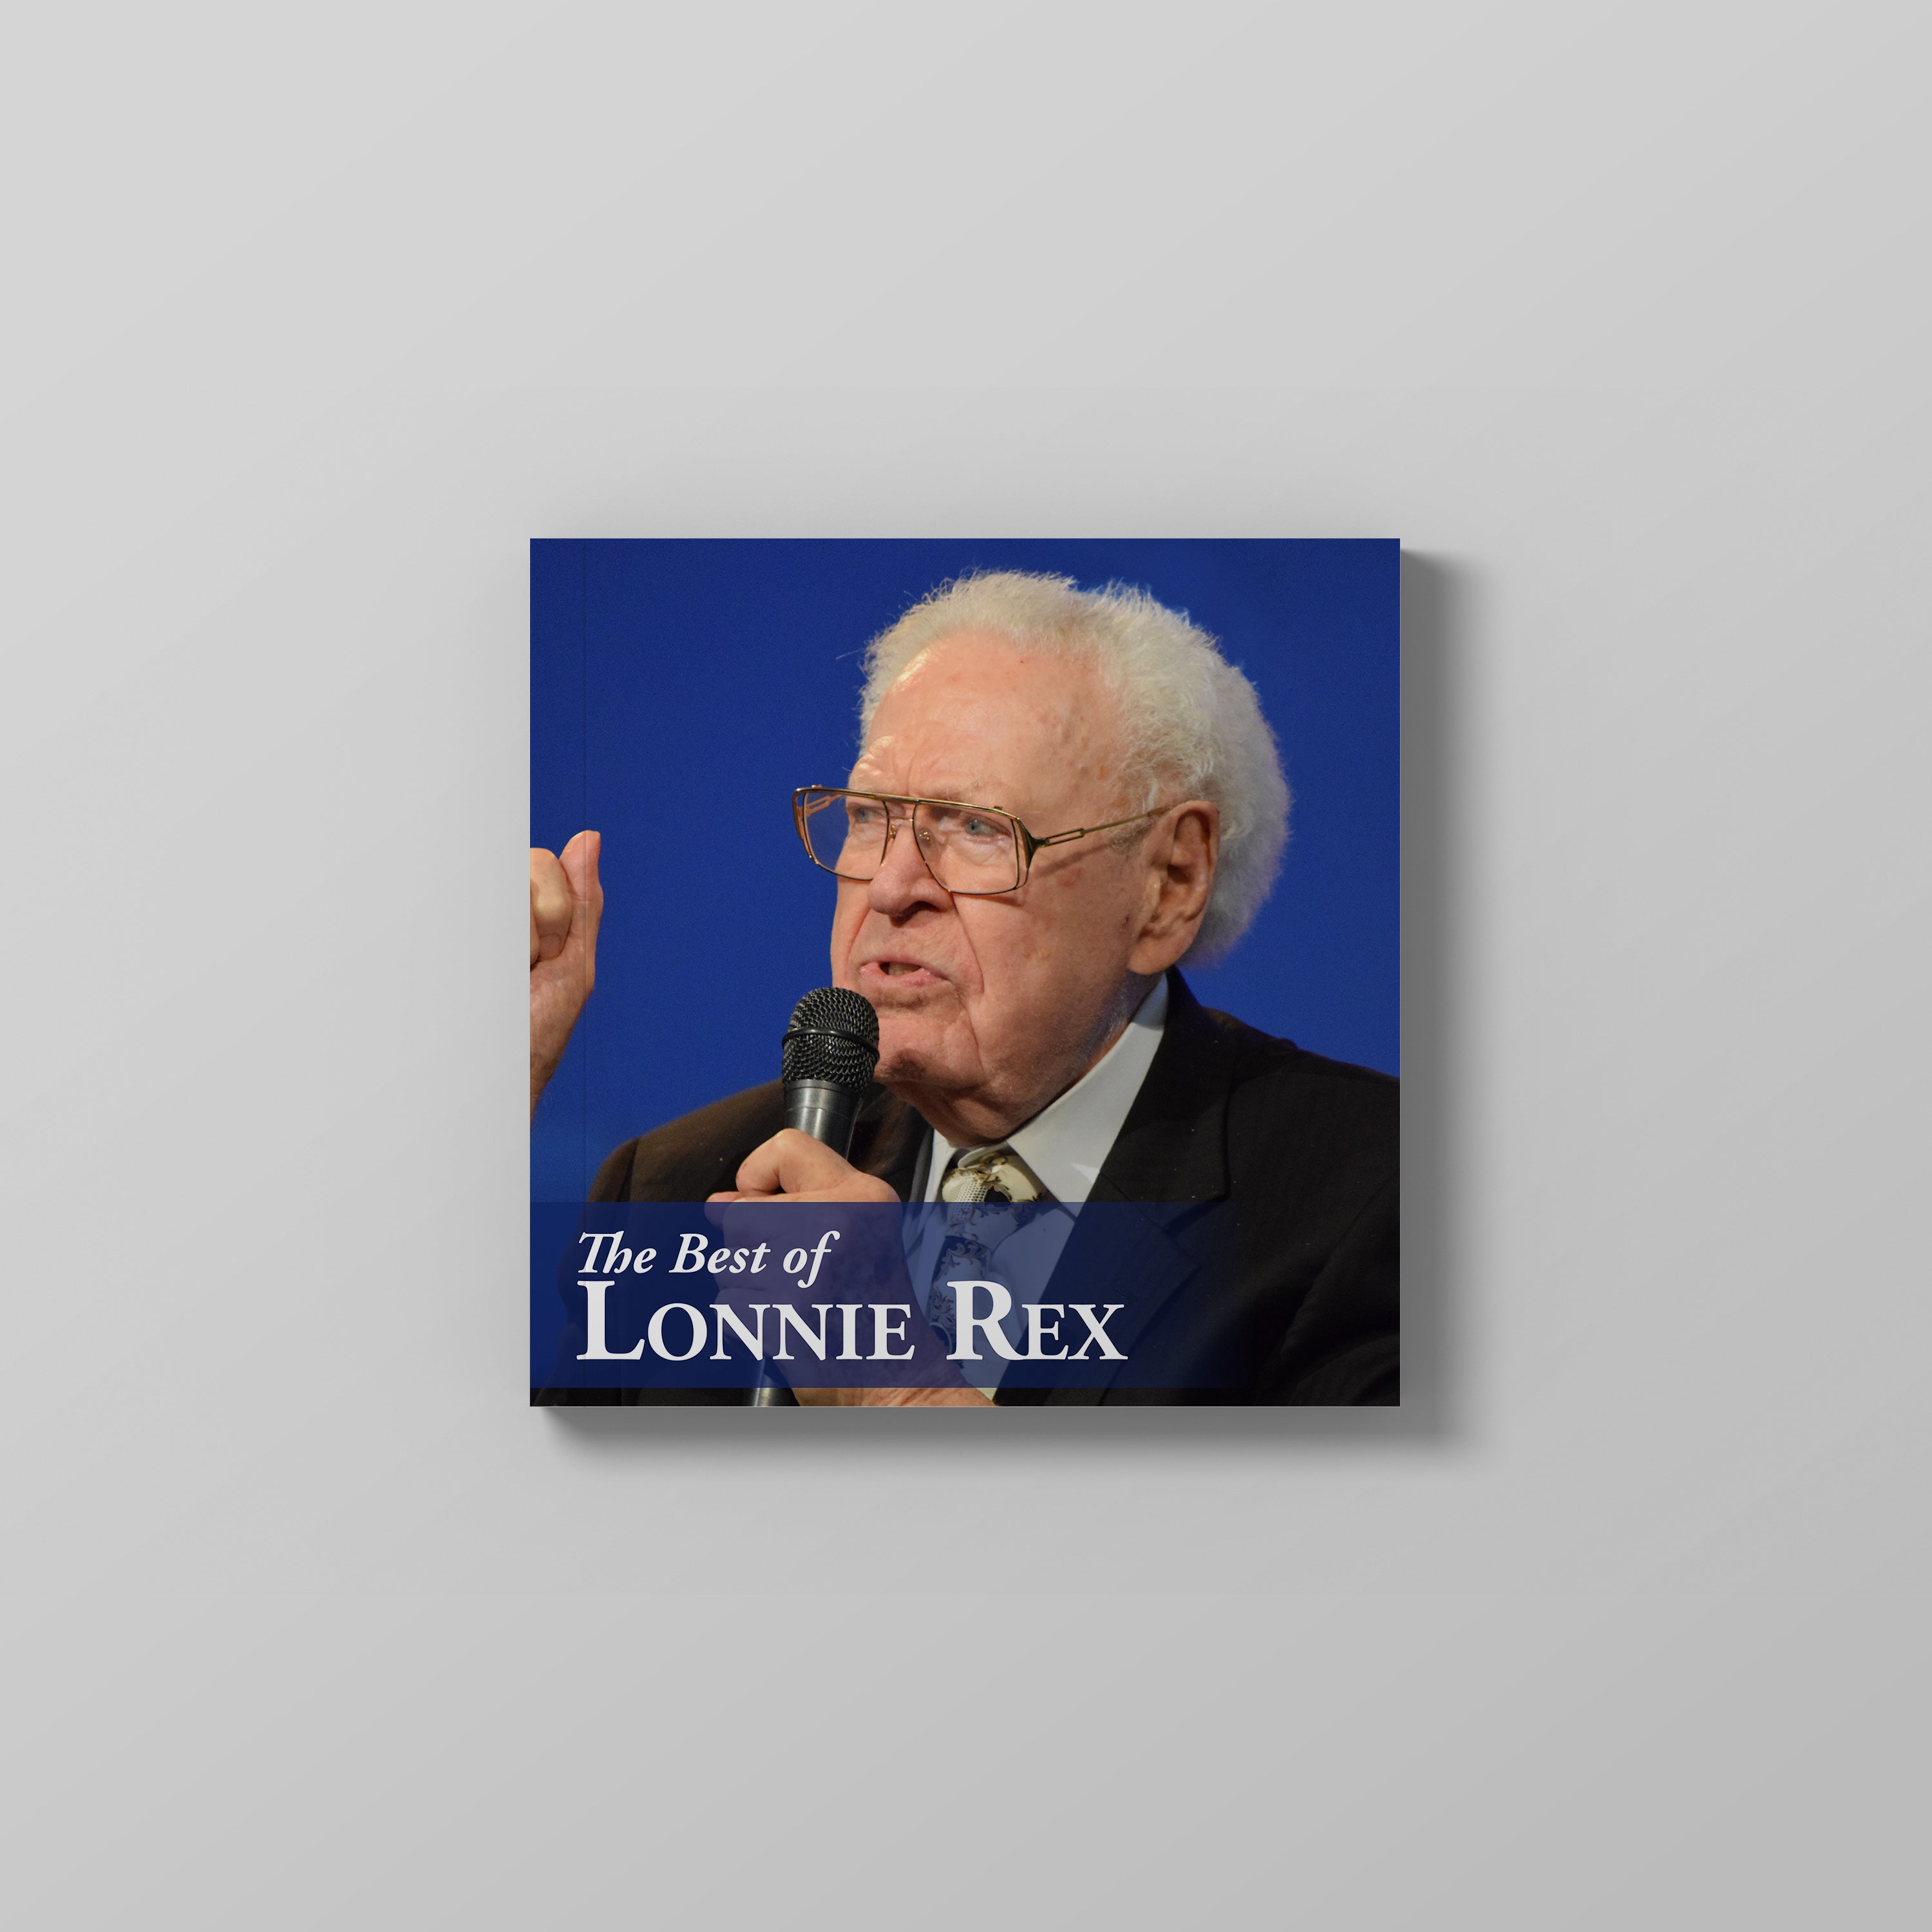 The Best of Lonnie Rex